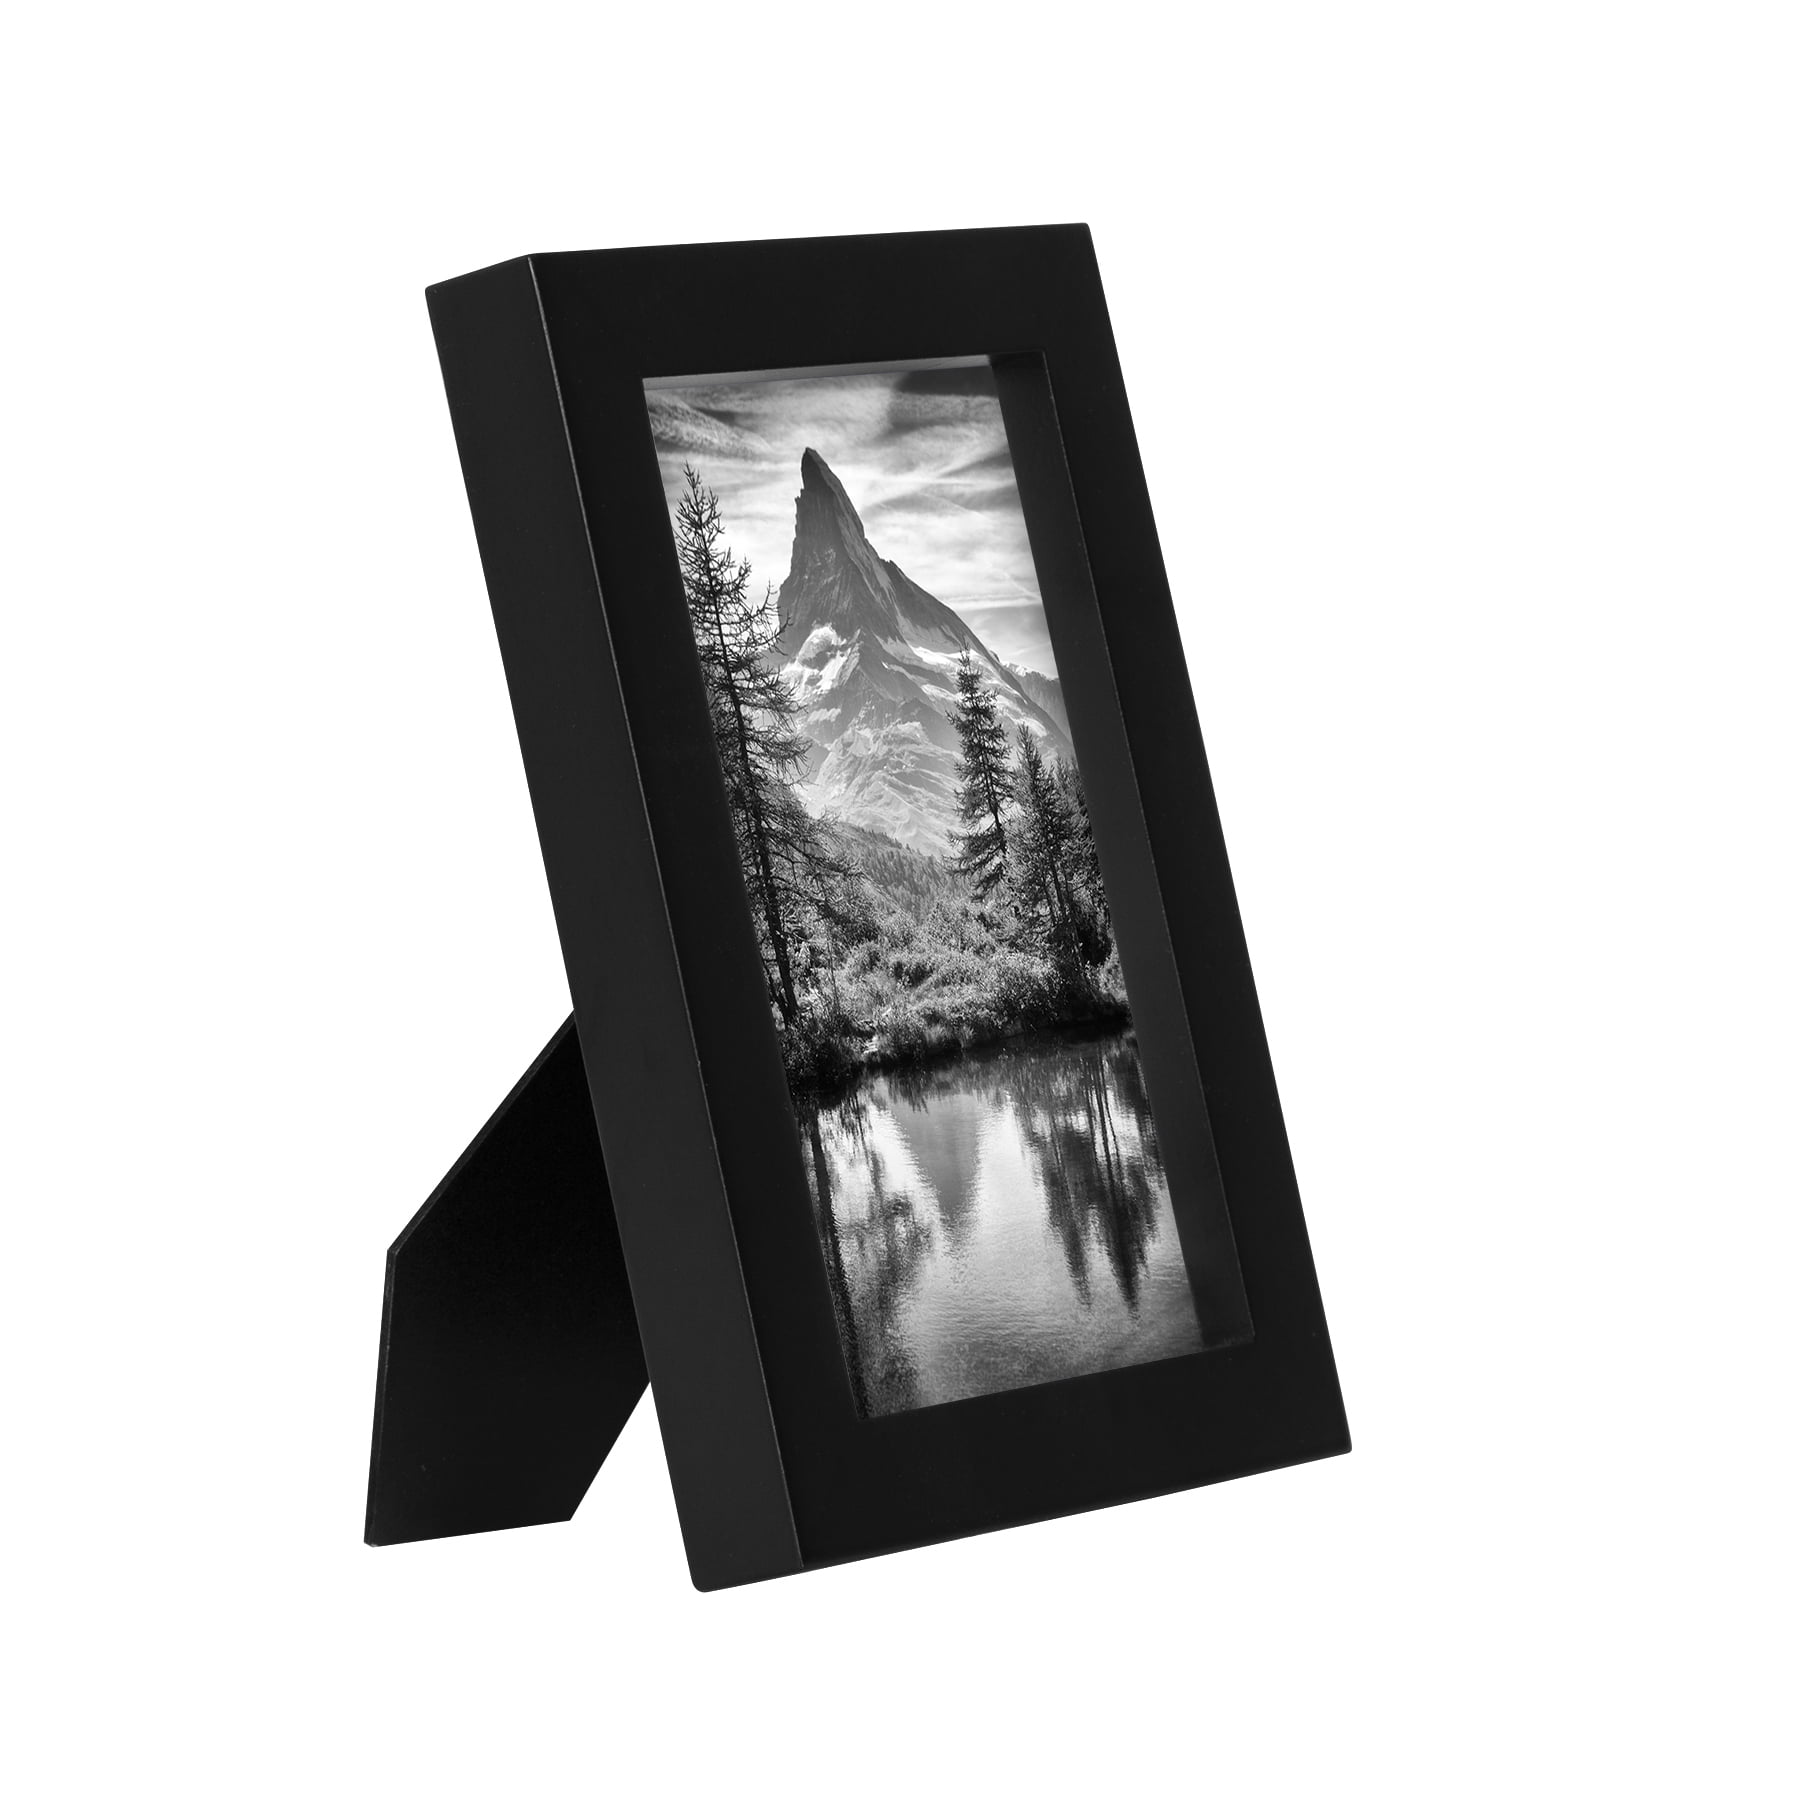 Hastings Home Hastings Home 4x6 Picture Frames - 6 Pack, Black 167604DGA